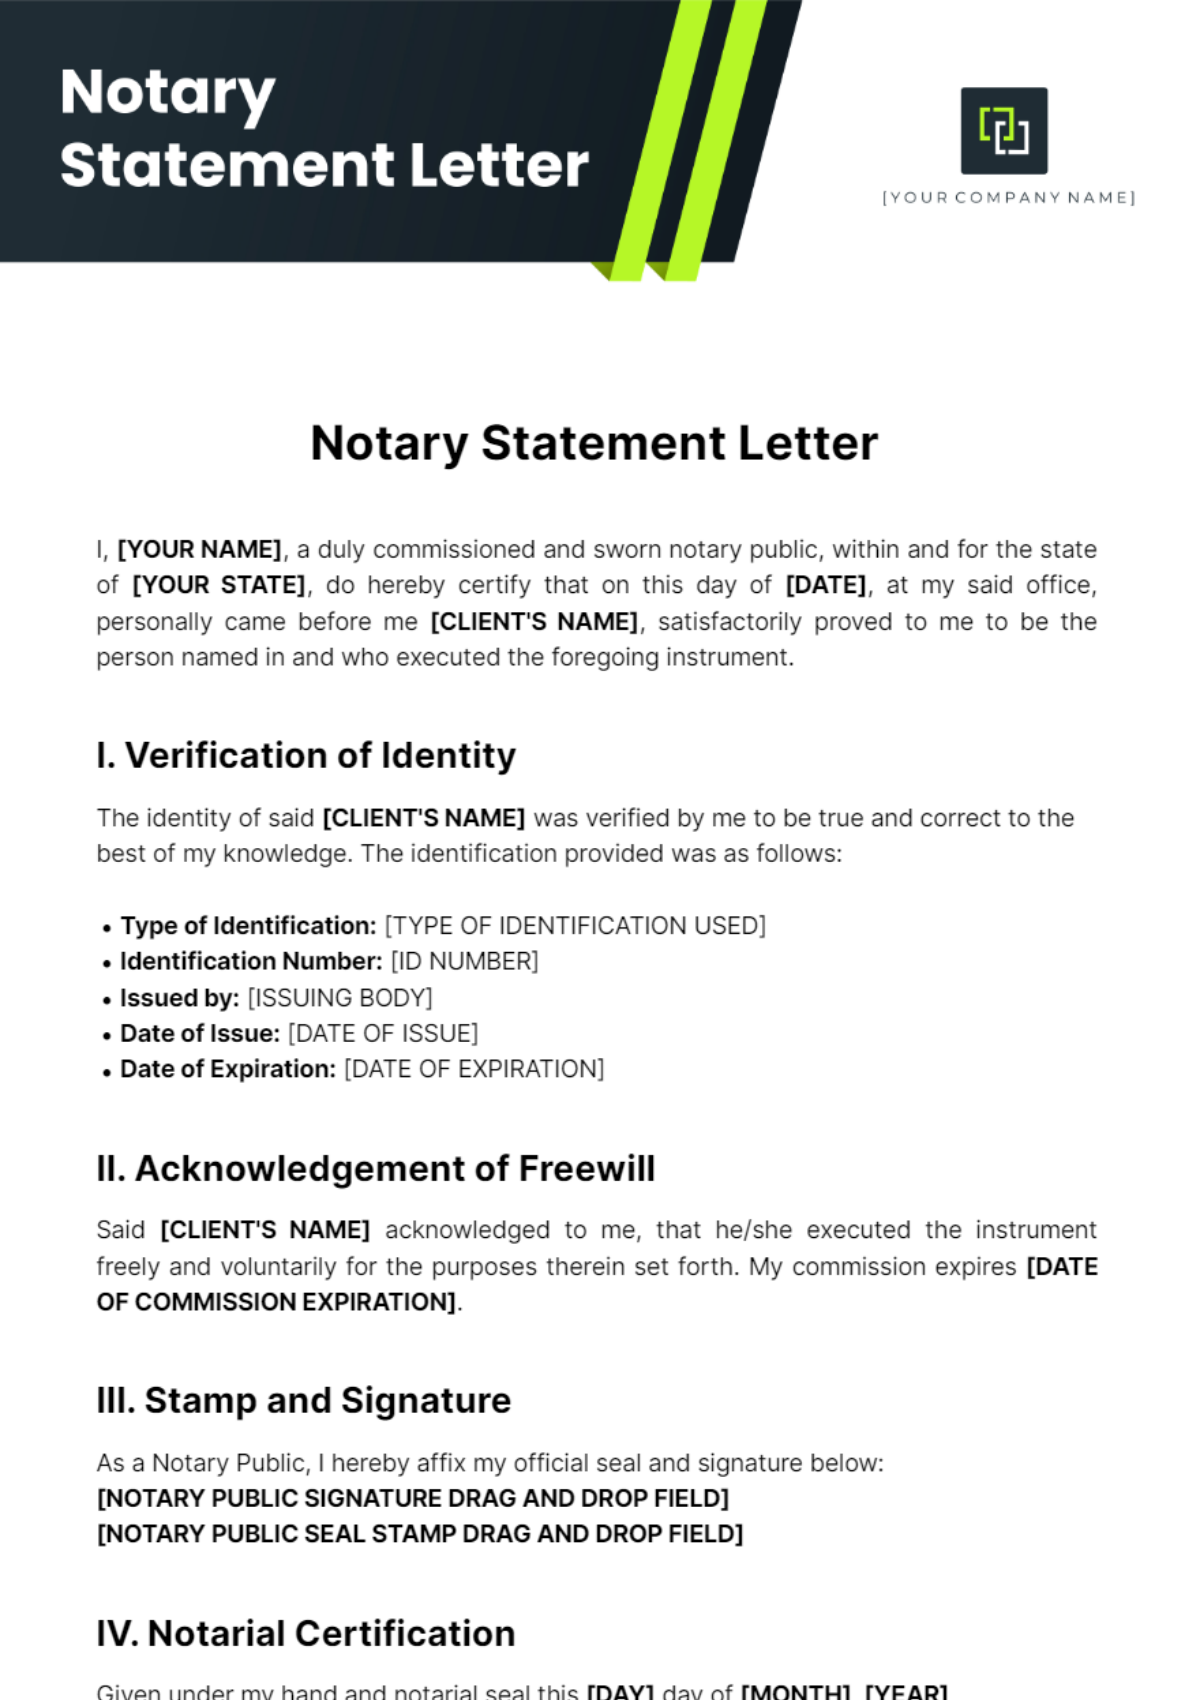 Notary Statement For Letter Template